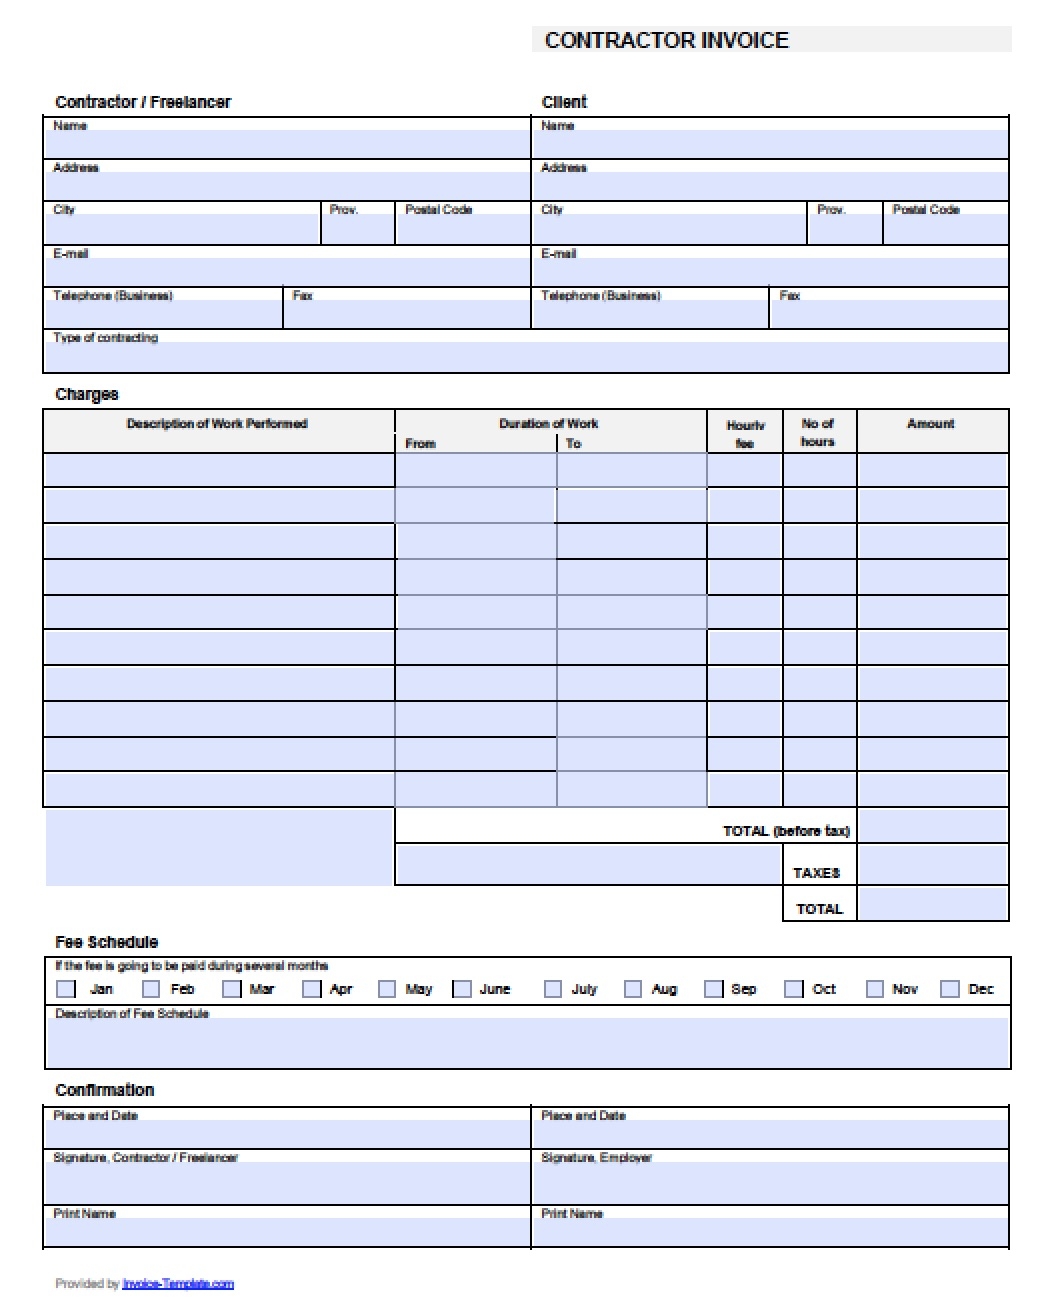 free contractor invoice template excel pdf word doc make a invoice template